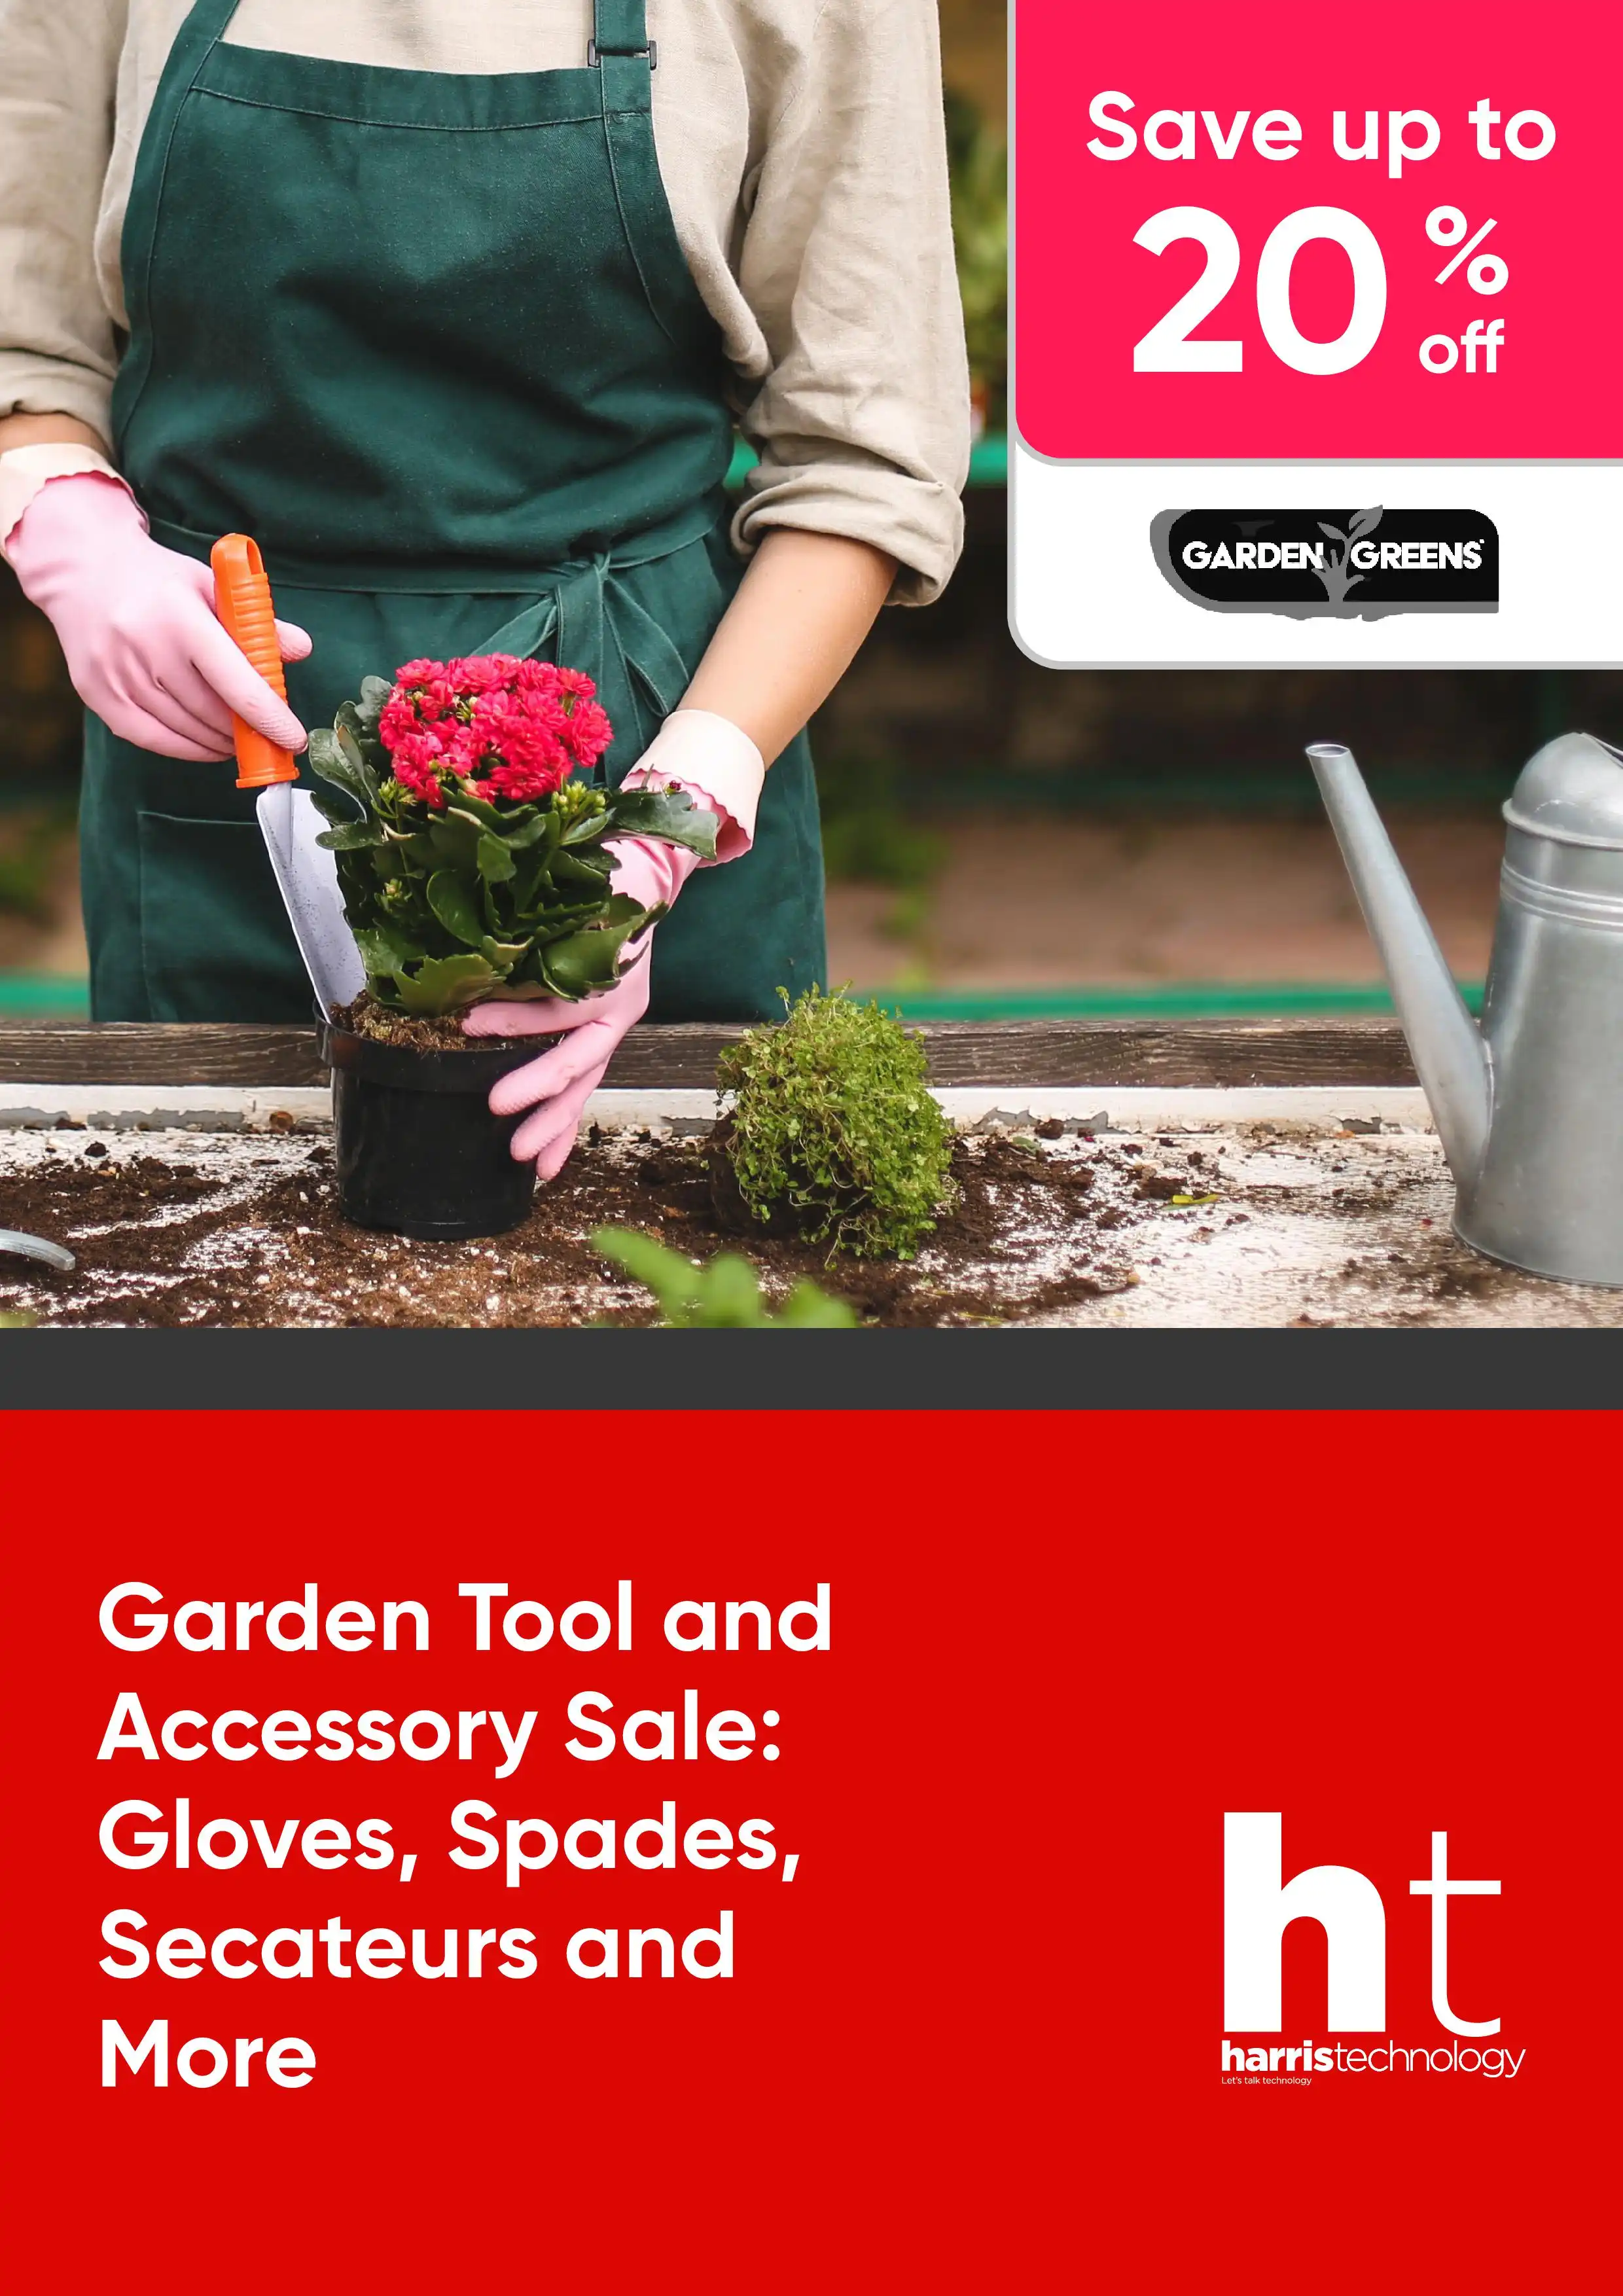 Garden Tool and Accessory Sale: Gloves, Spades, Secateurs and More – up to 20% off